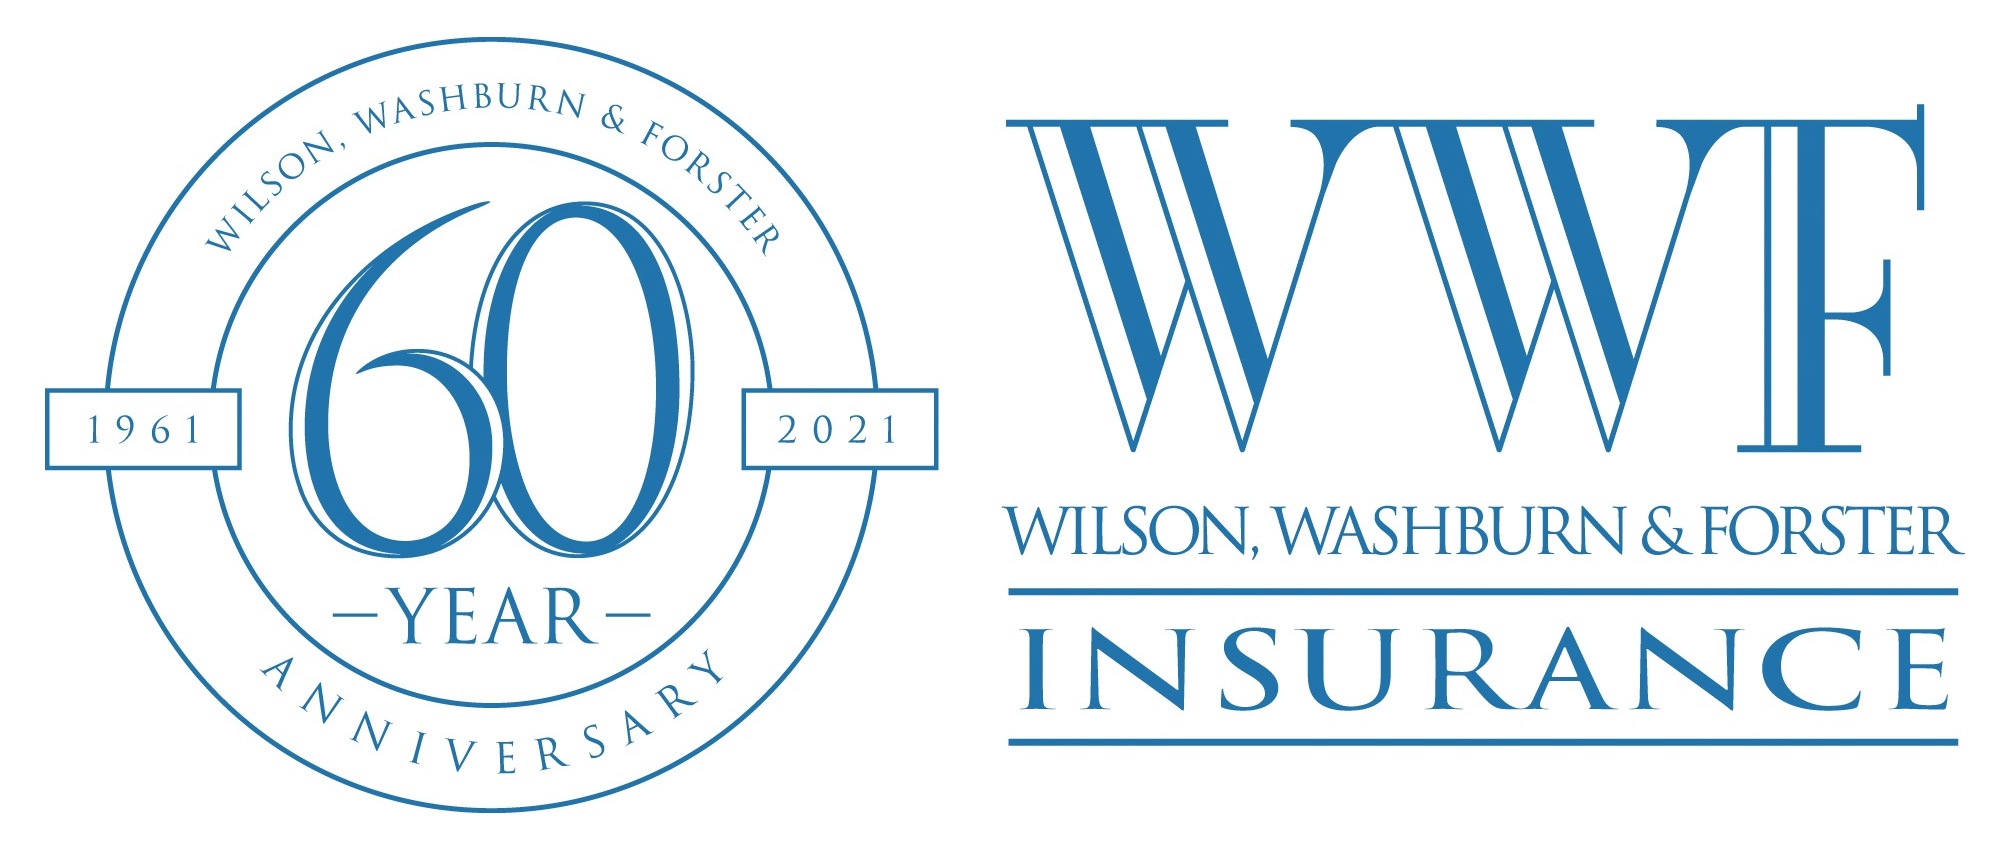 Wilson, Washburn and Forster Insurance: Protecting Clients The World Class Way for 60 Years